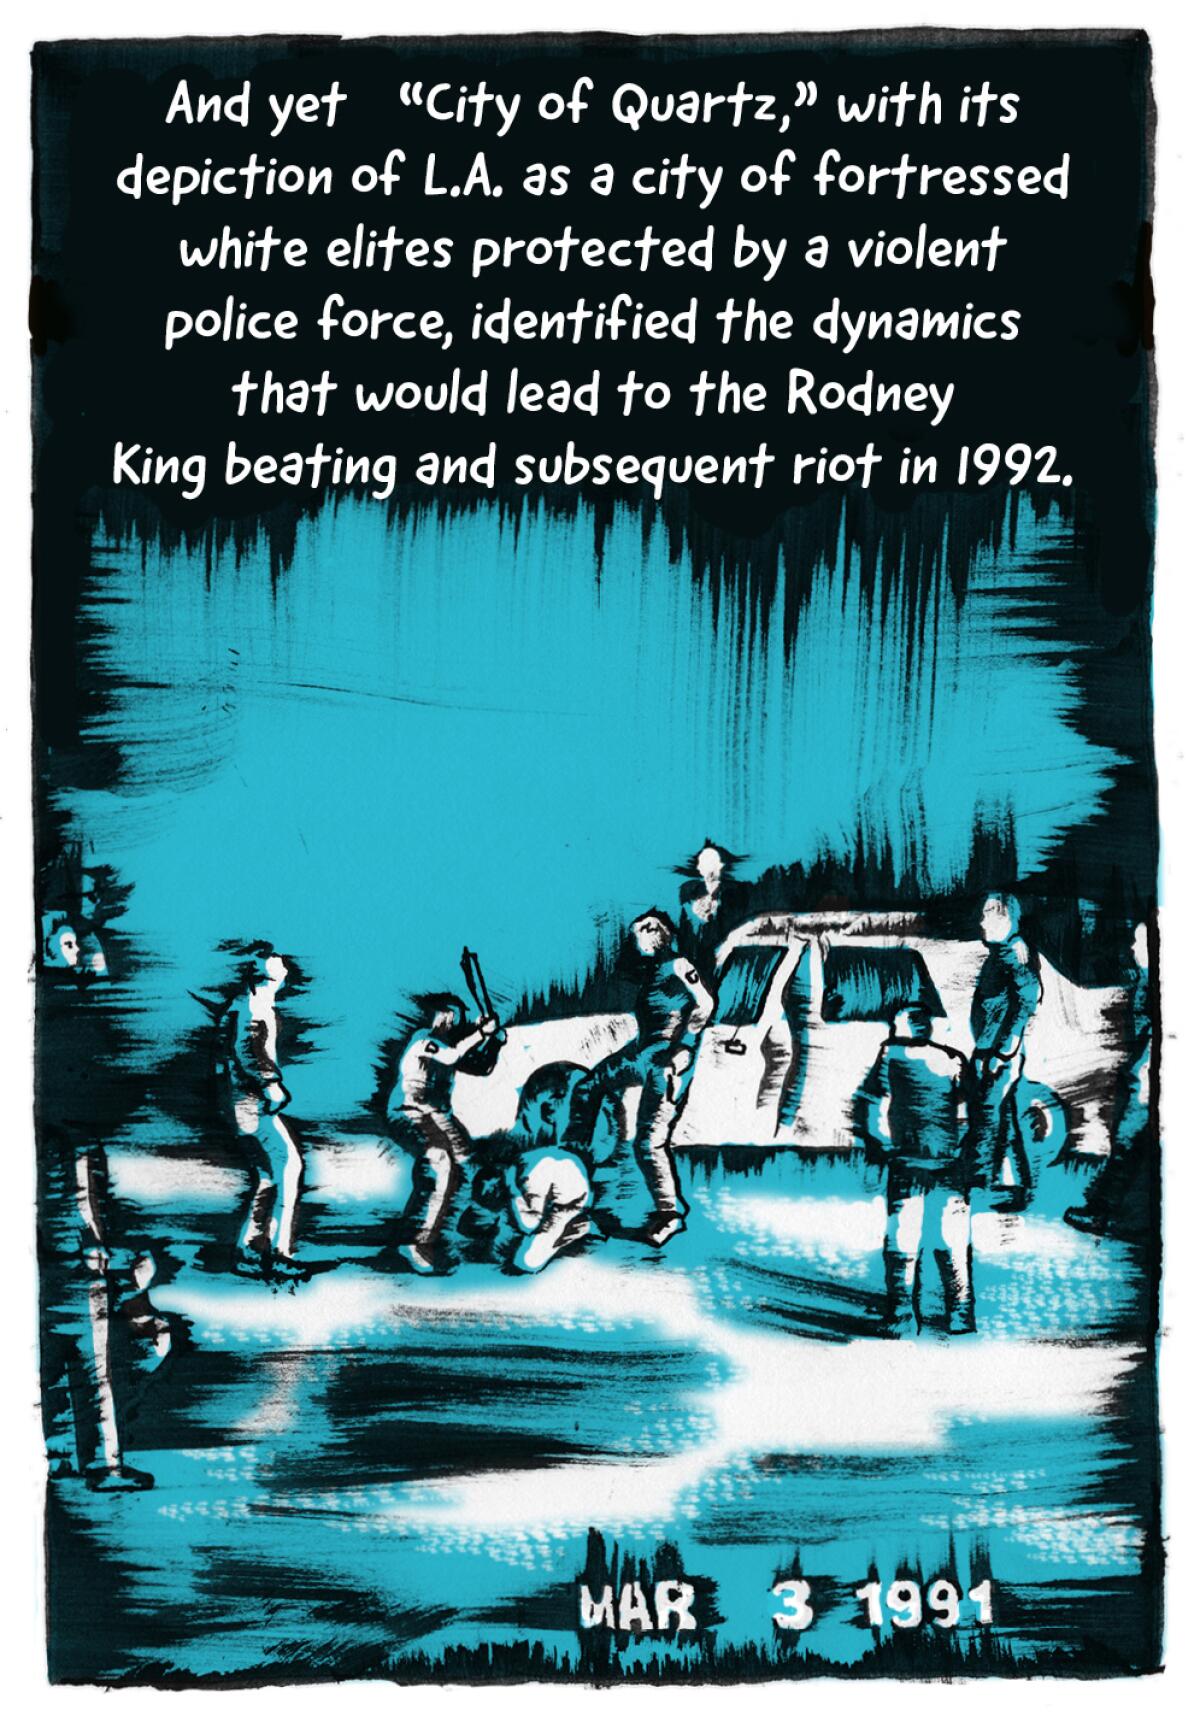 Yet his depiction of LA as a city of white elites protected by violent police identified dynamics leading to Rodney King